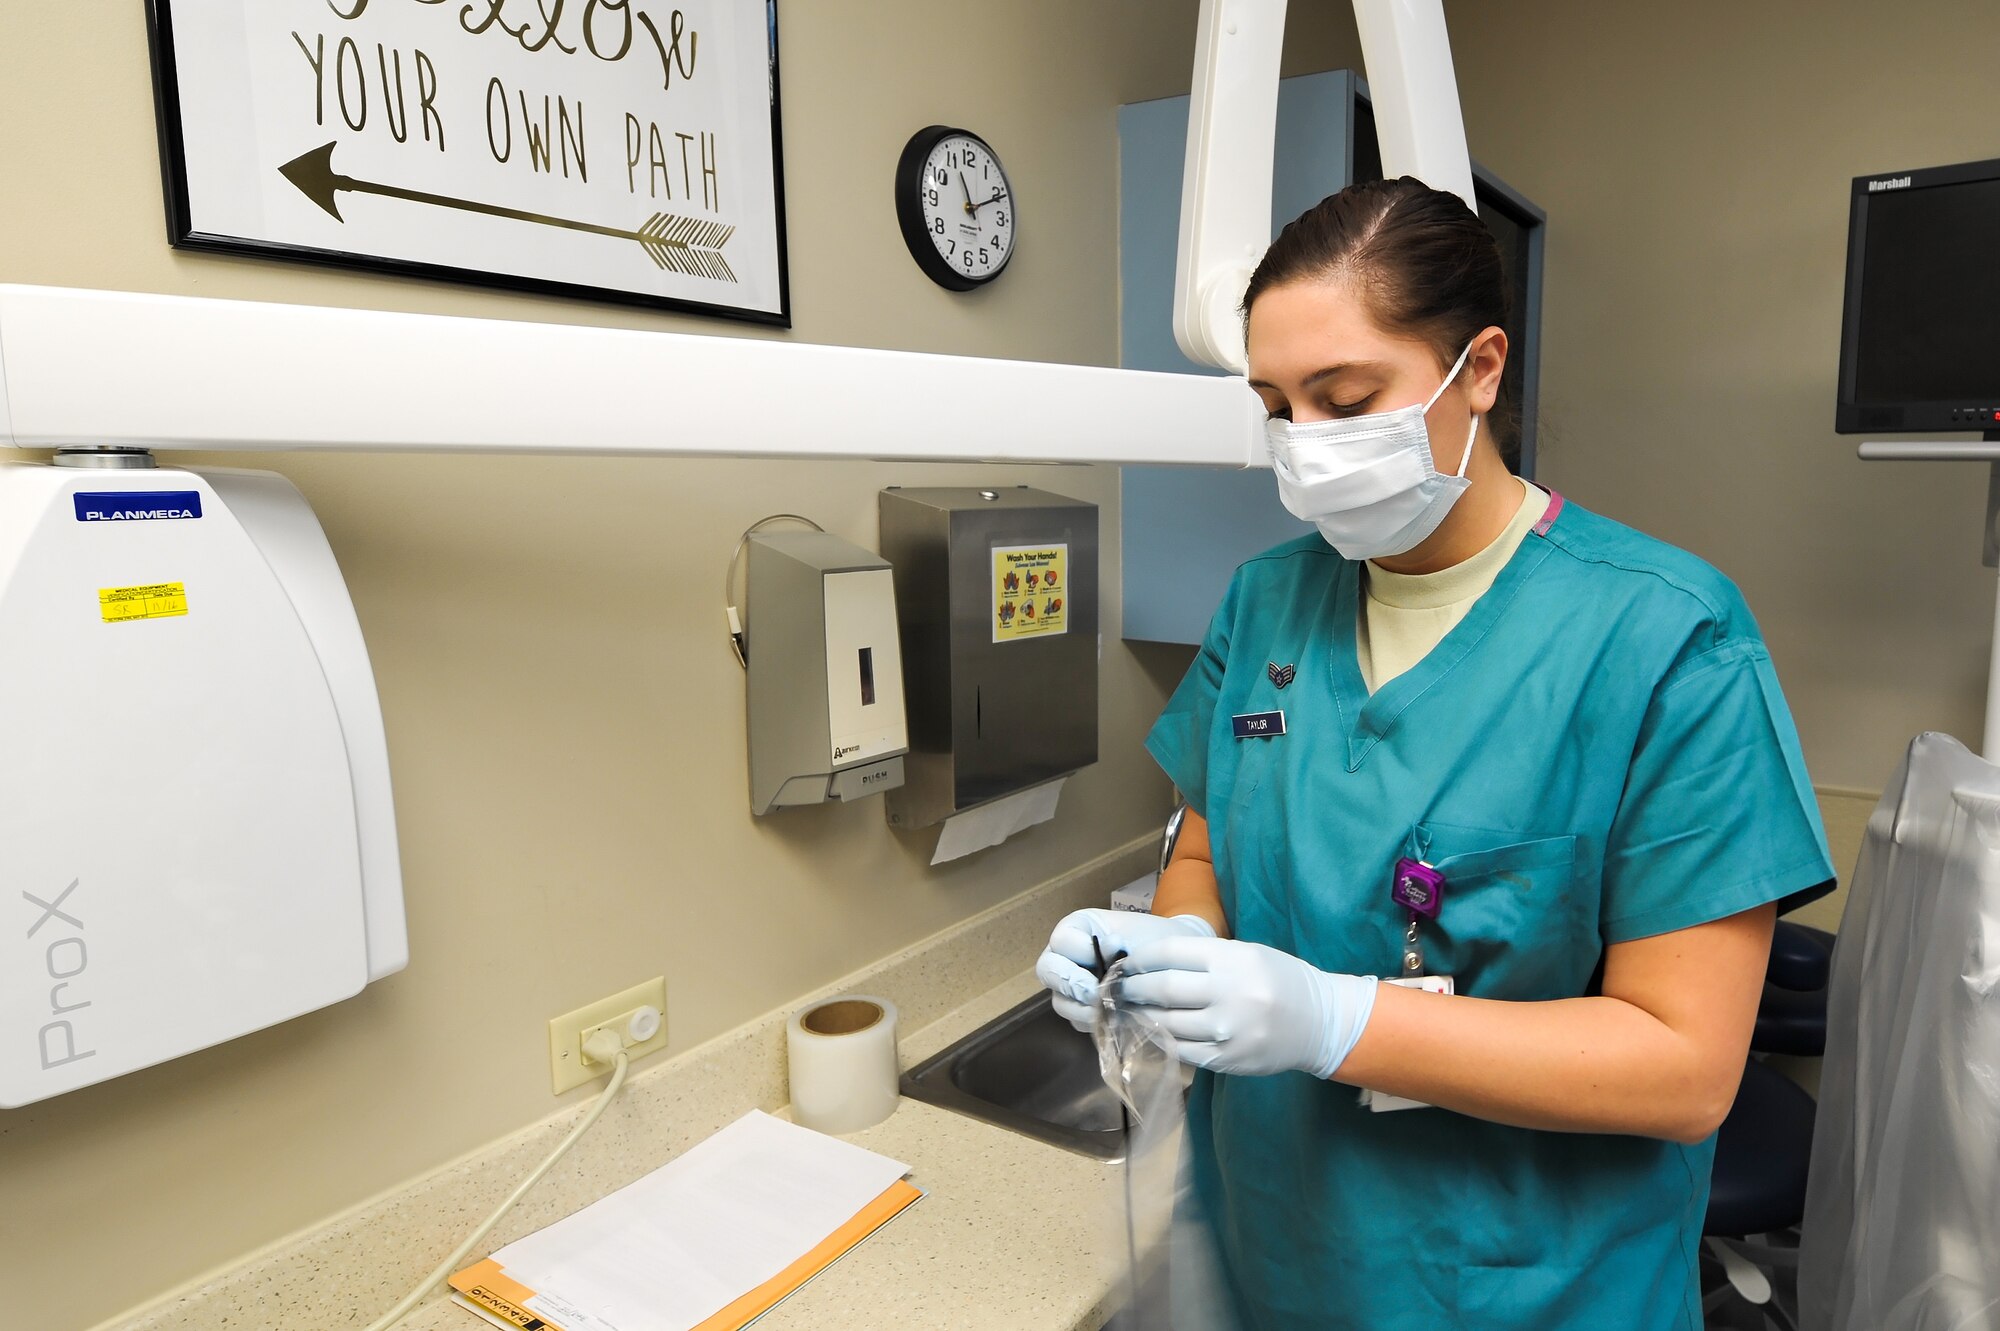 Senior Airman Ceiera Taylor, a dental technician with the 1st Special Operations Dental Squadron, prepares to take x-rays of a patient at Hurlburt Field, Fla., Oct. 4, 2016. Taylor takes x-rays for the dentist as part of an annual check-up for patients. (U.S. Air Force photo by Senior Airman Jeff Parkinson/Released)